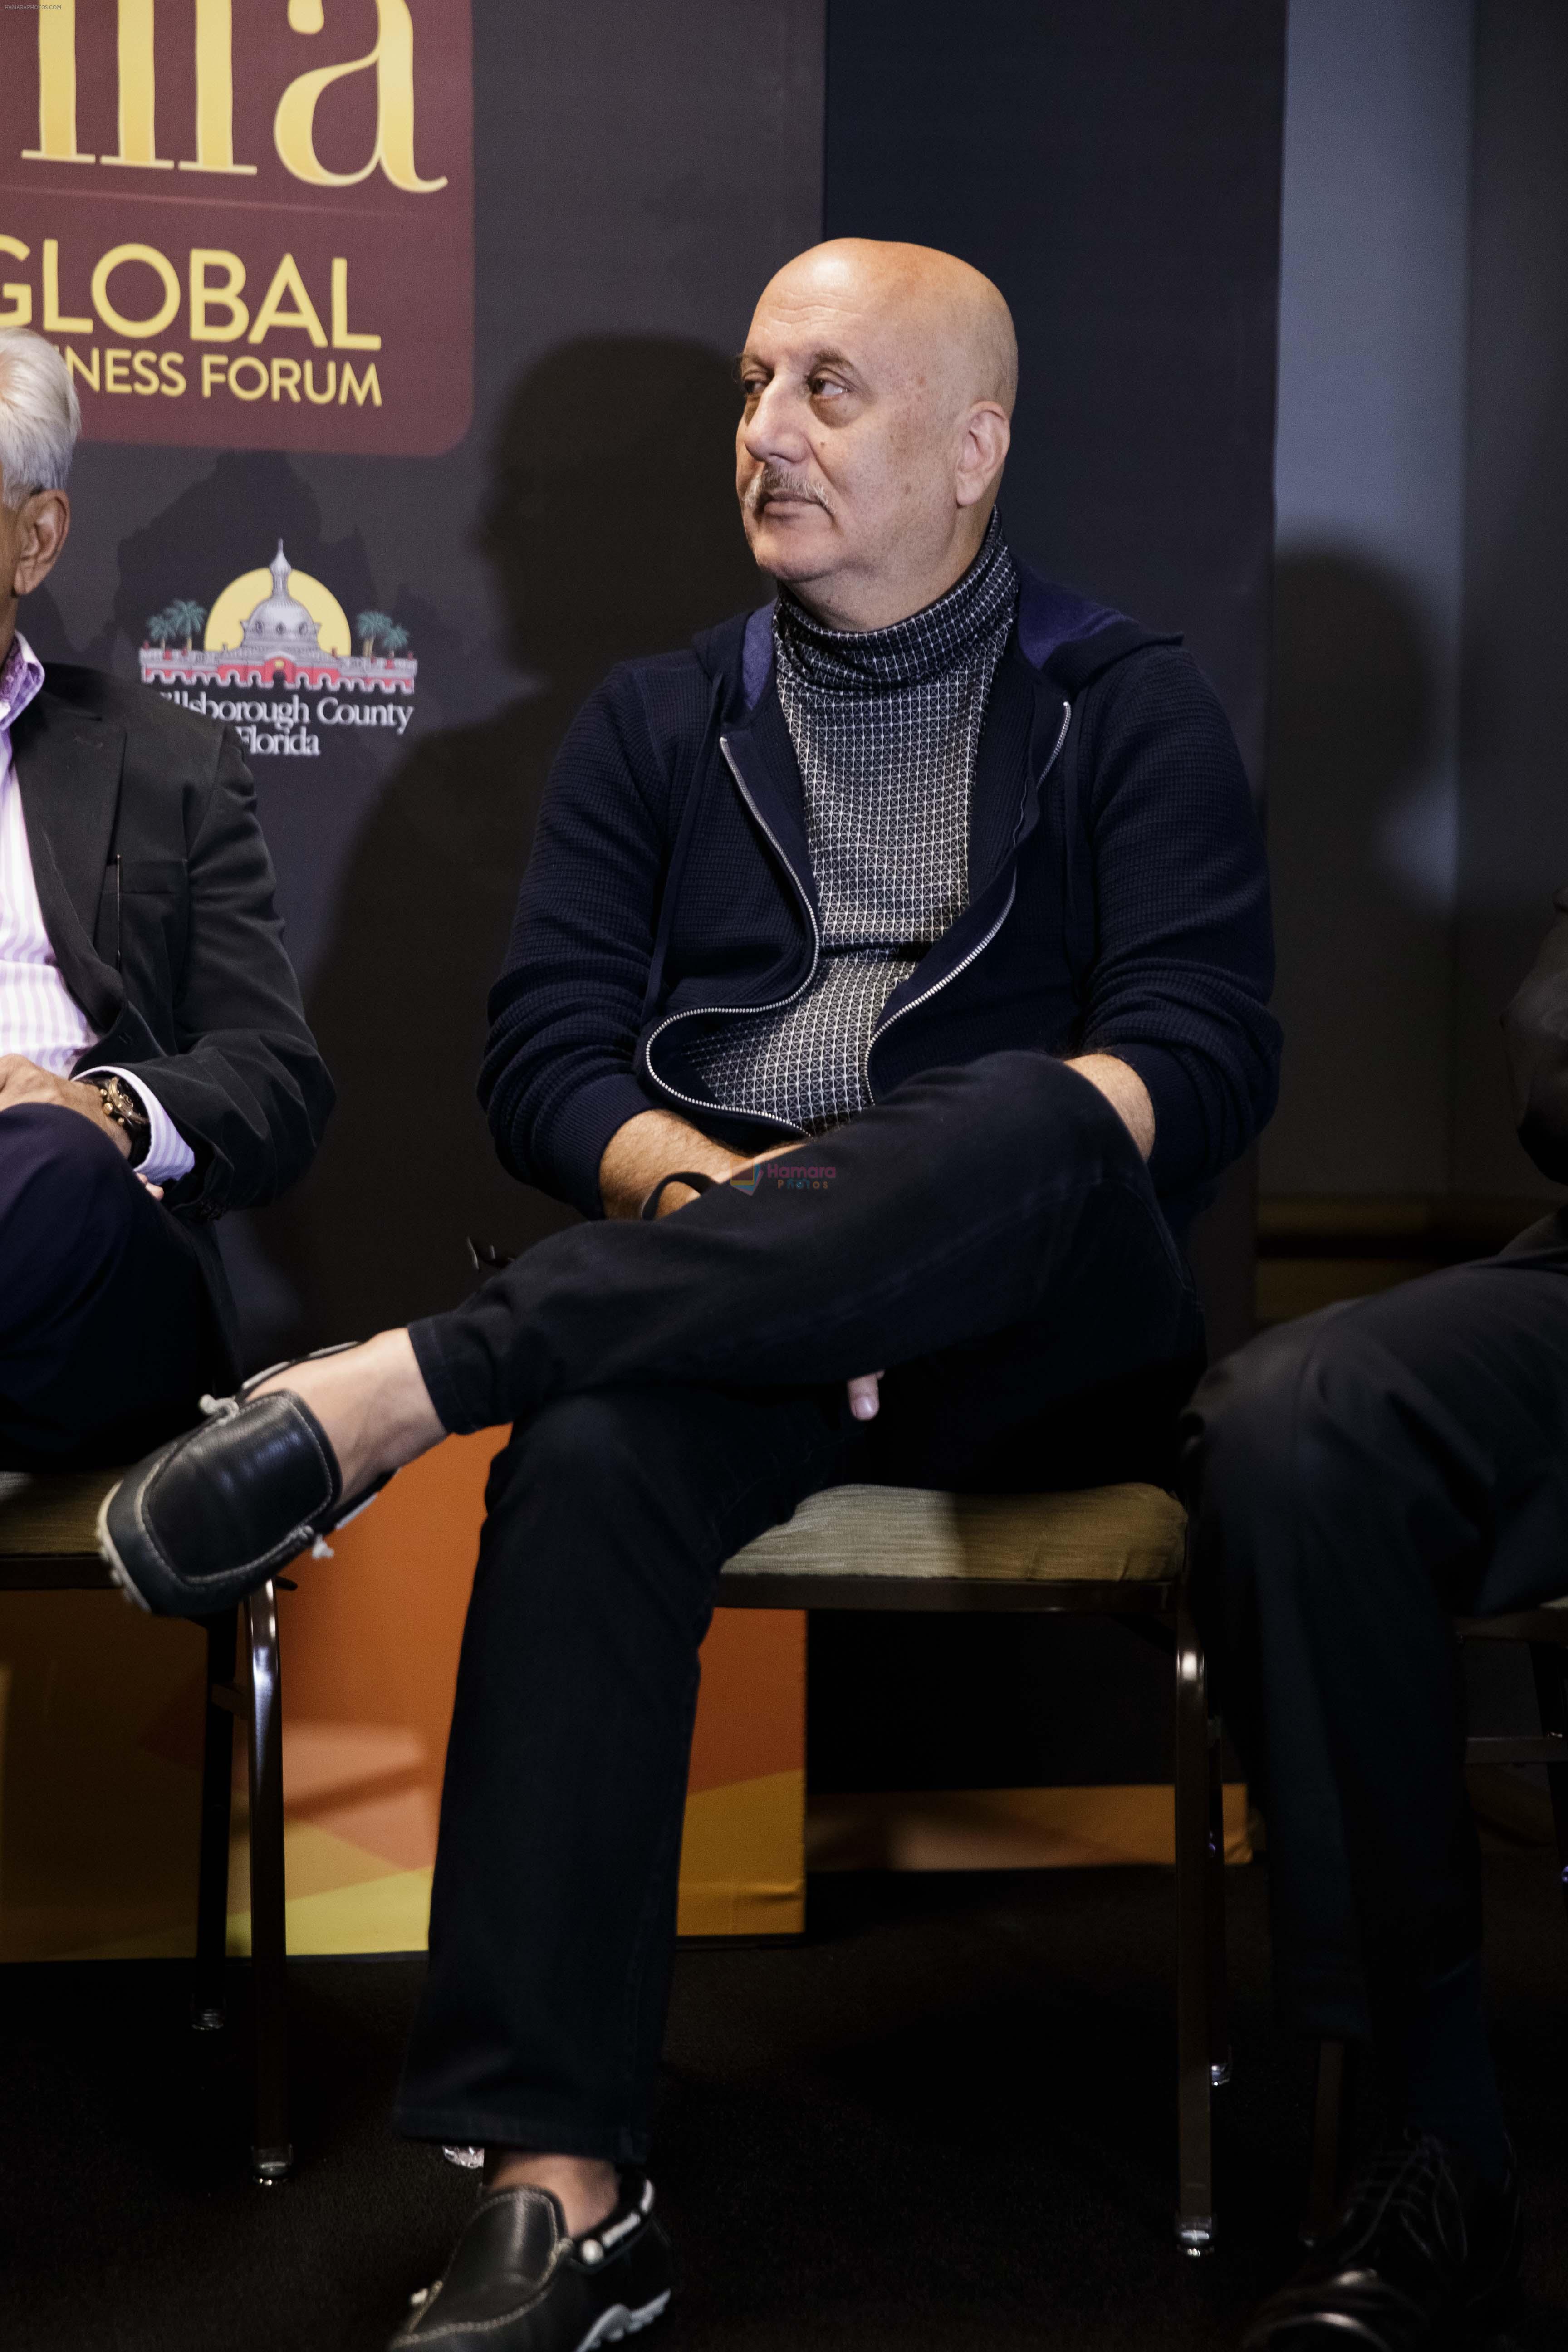 Anupam Kher at FICCI-IIFA Global Business Forum in Tampa Convention Centre on 25th April 2014